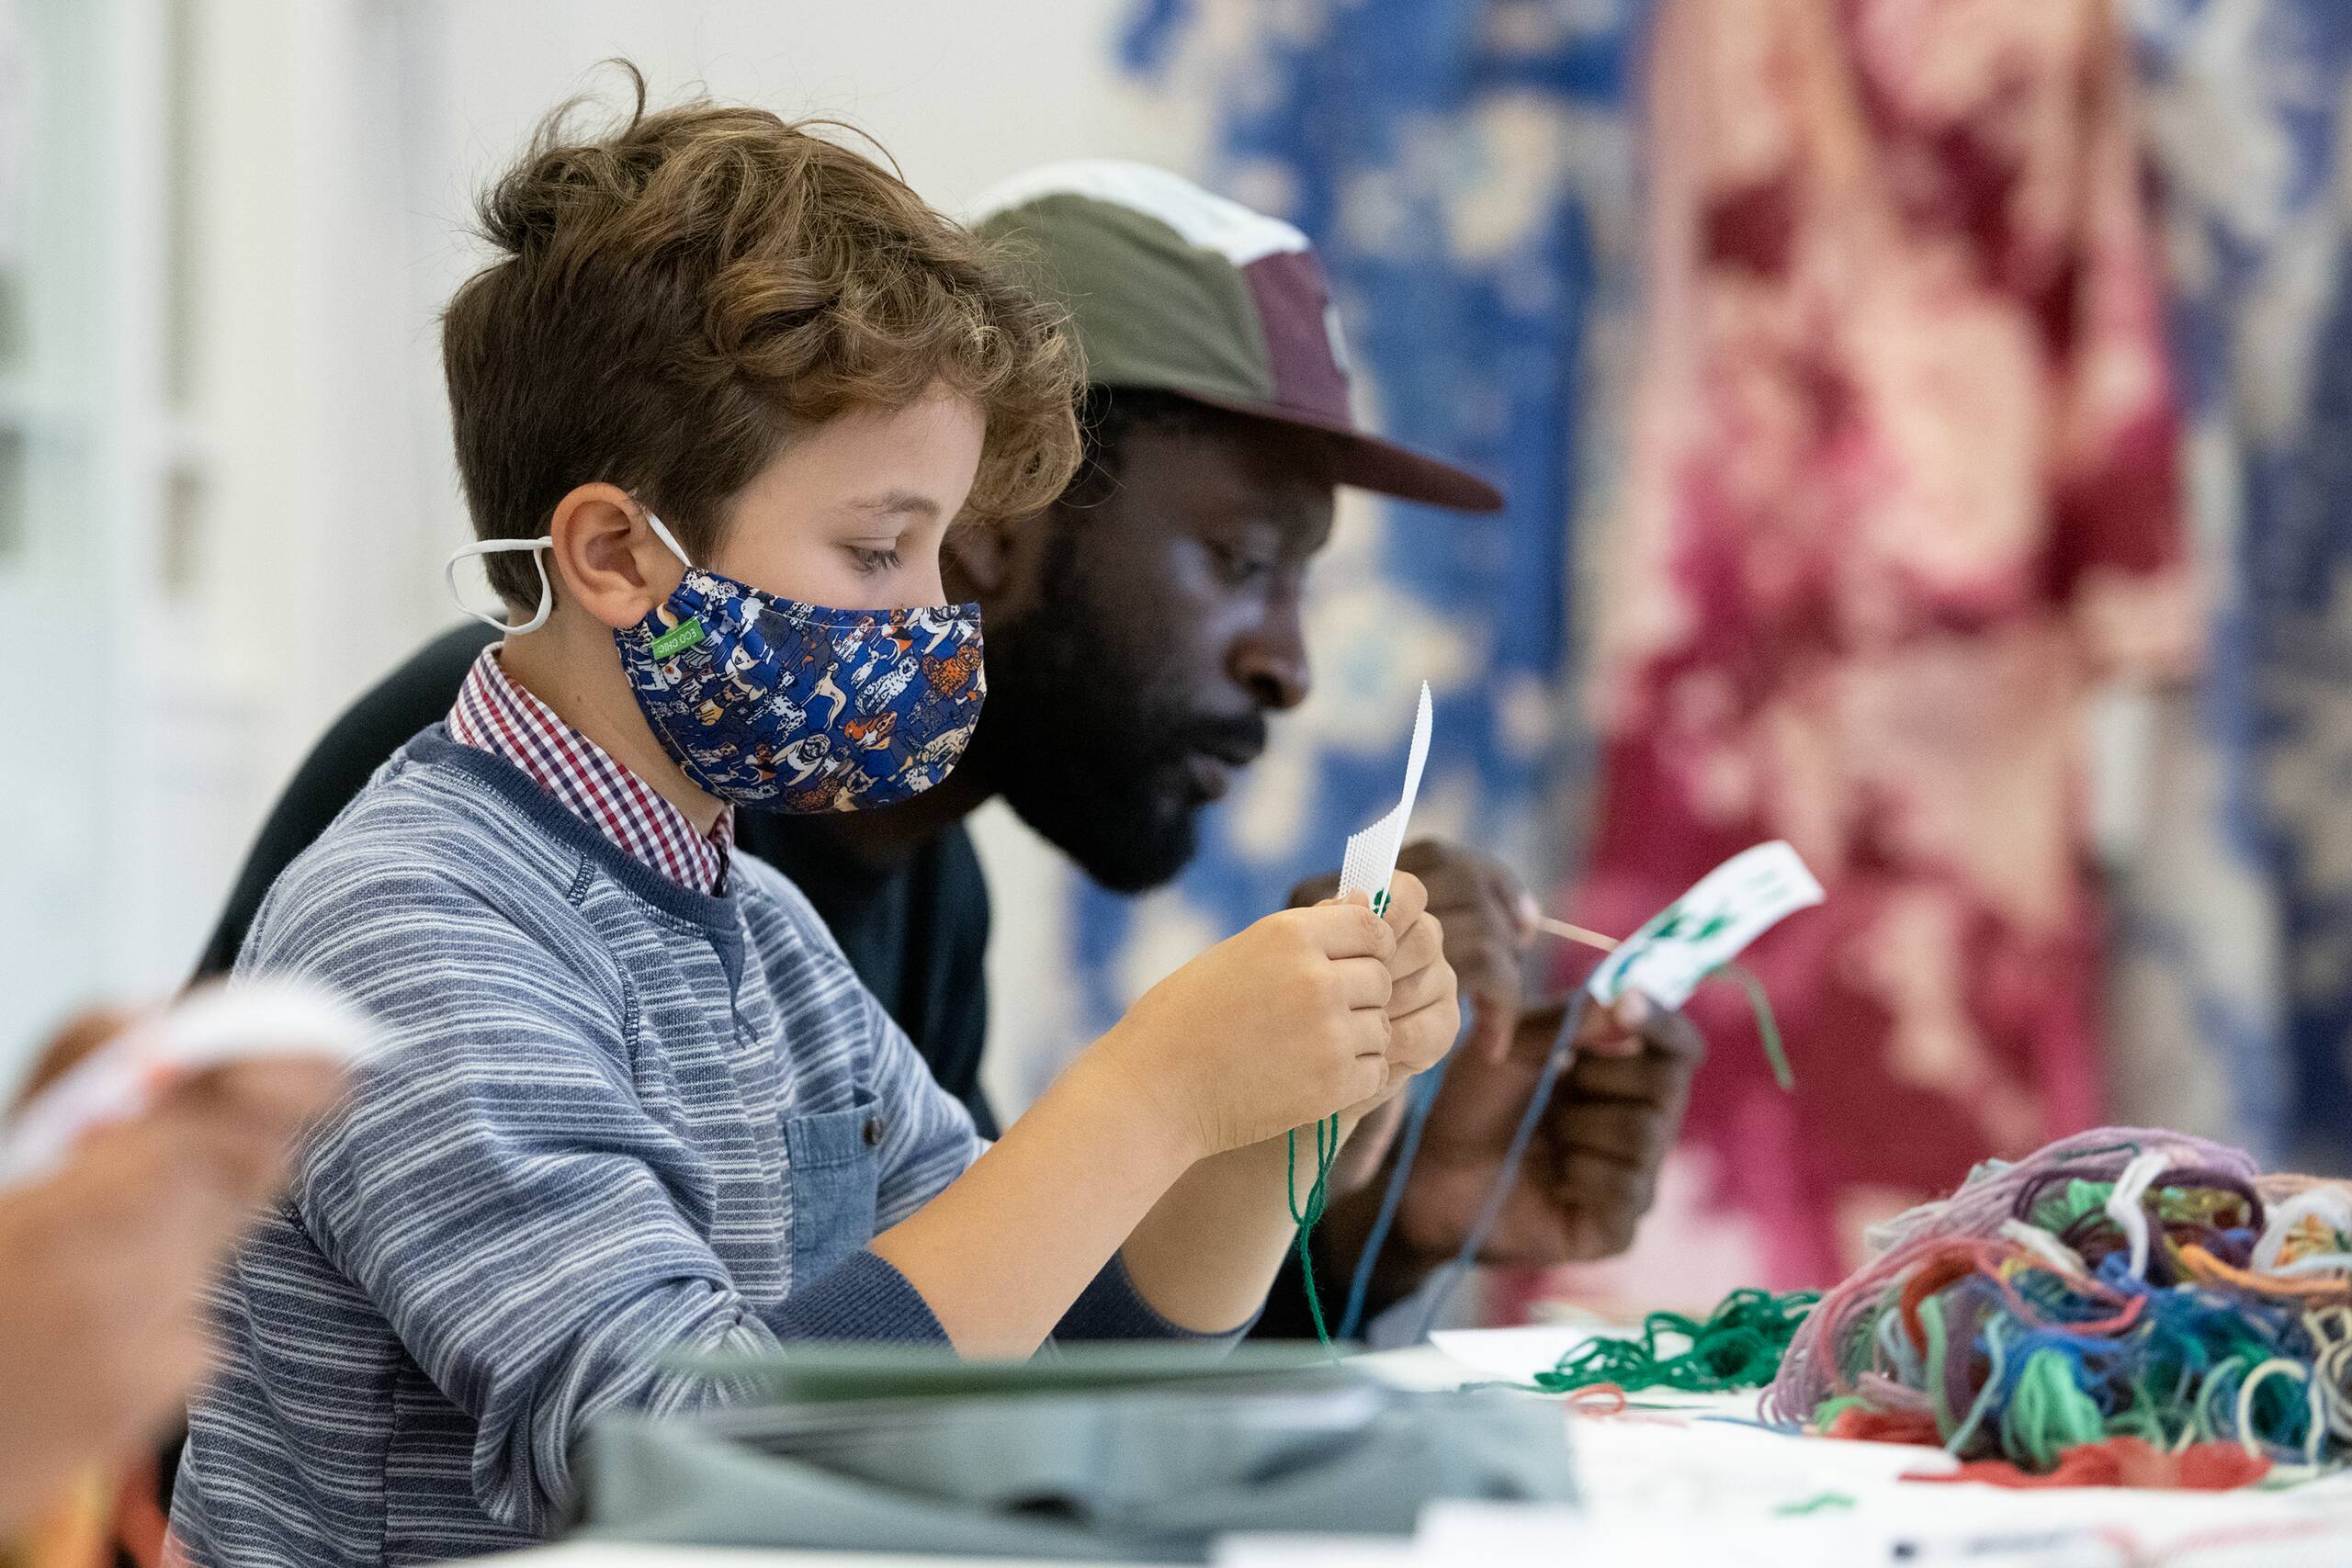 Family drop-in workshops, Series of 4 drop-in bargello workshops for all ages held at SPACE studios, London UK, 2021-22